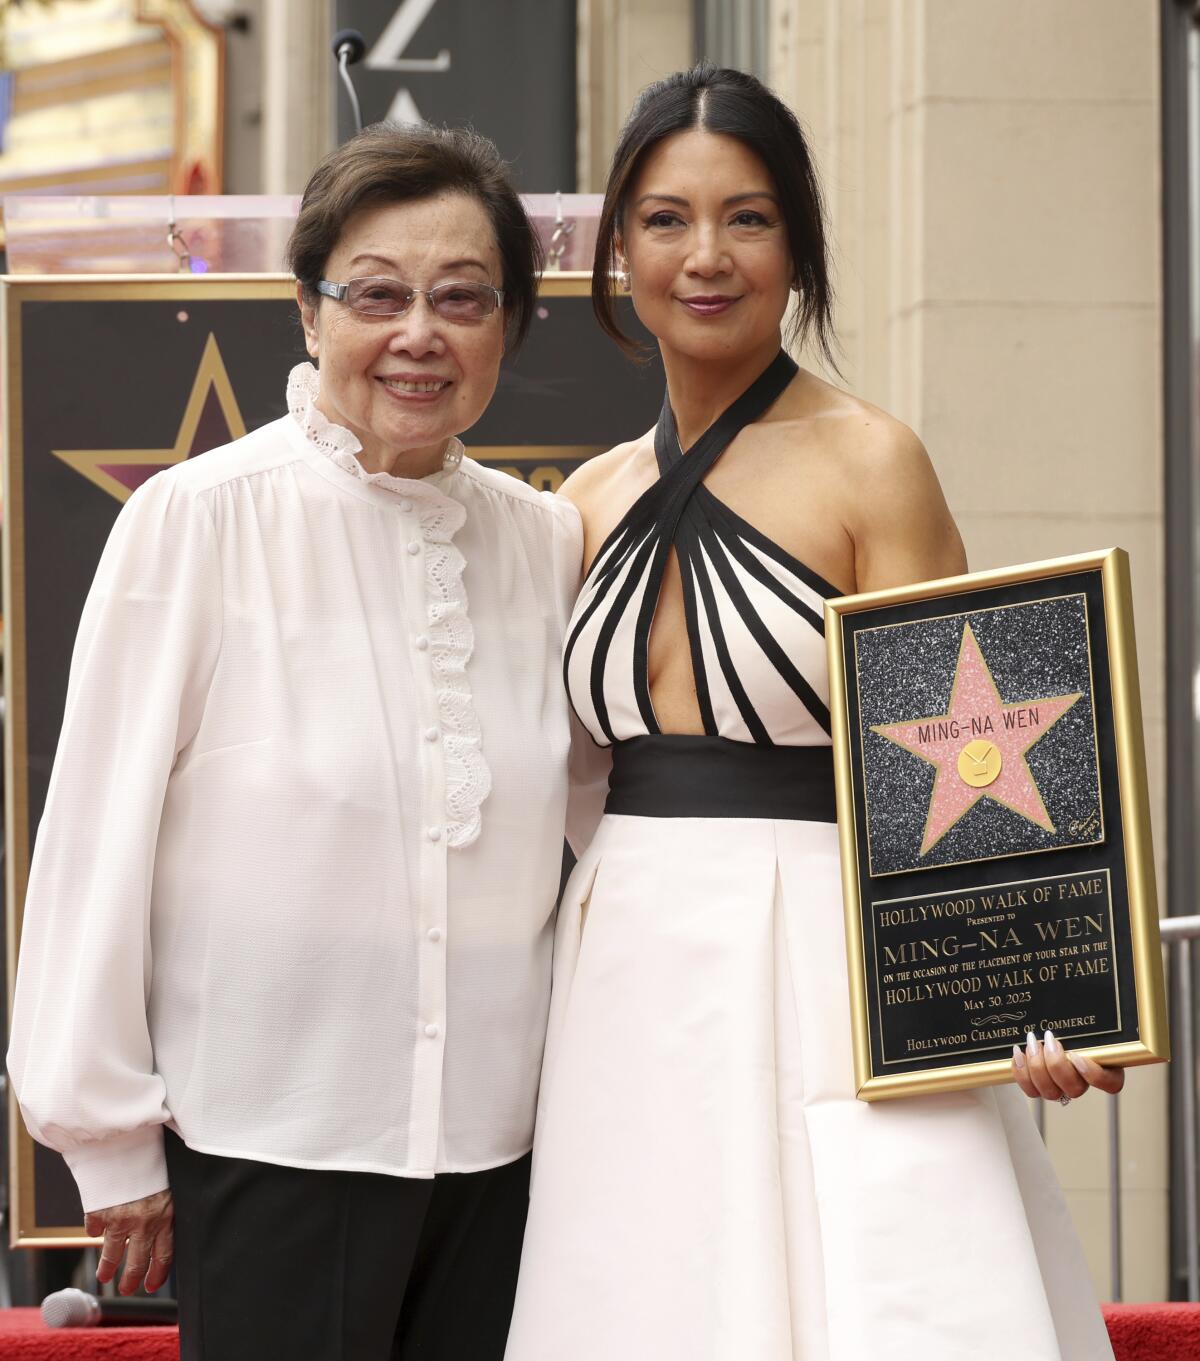 Ming-Na Wen gets her star on the Hollywood Walk of Fame - Los